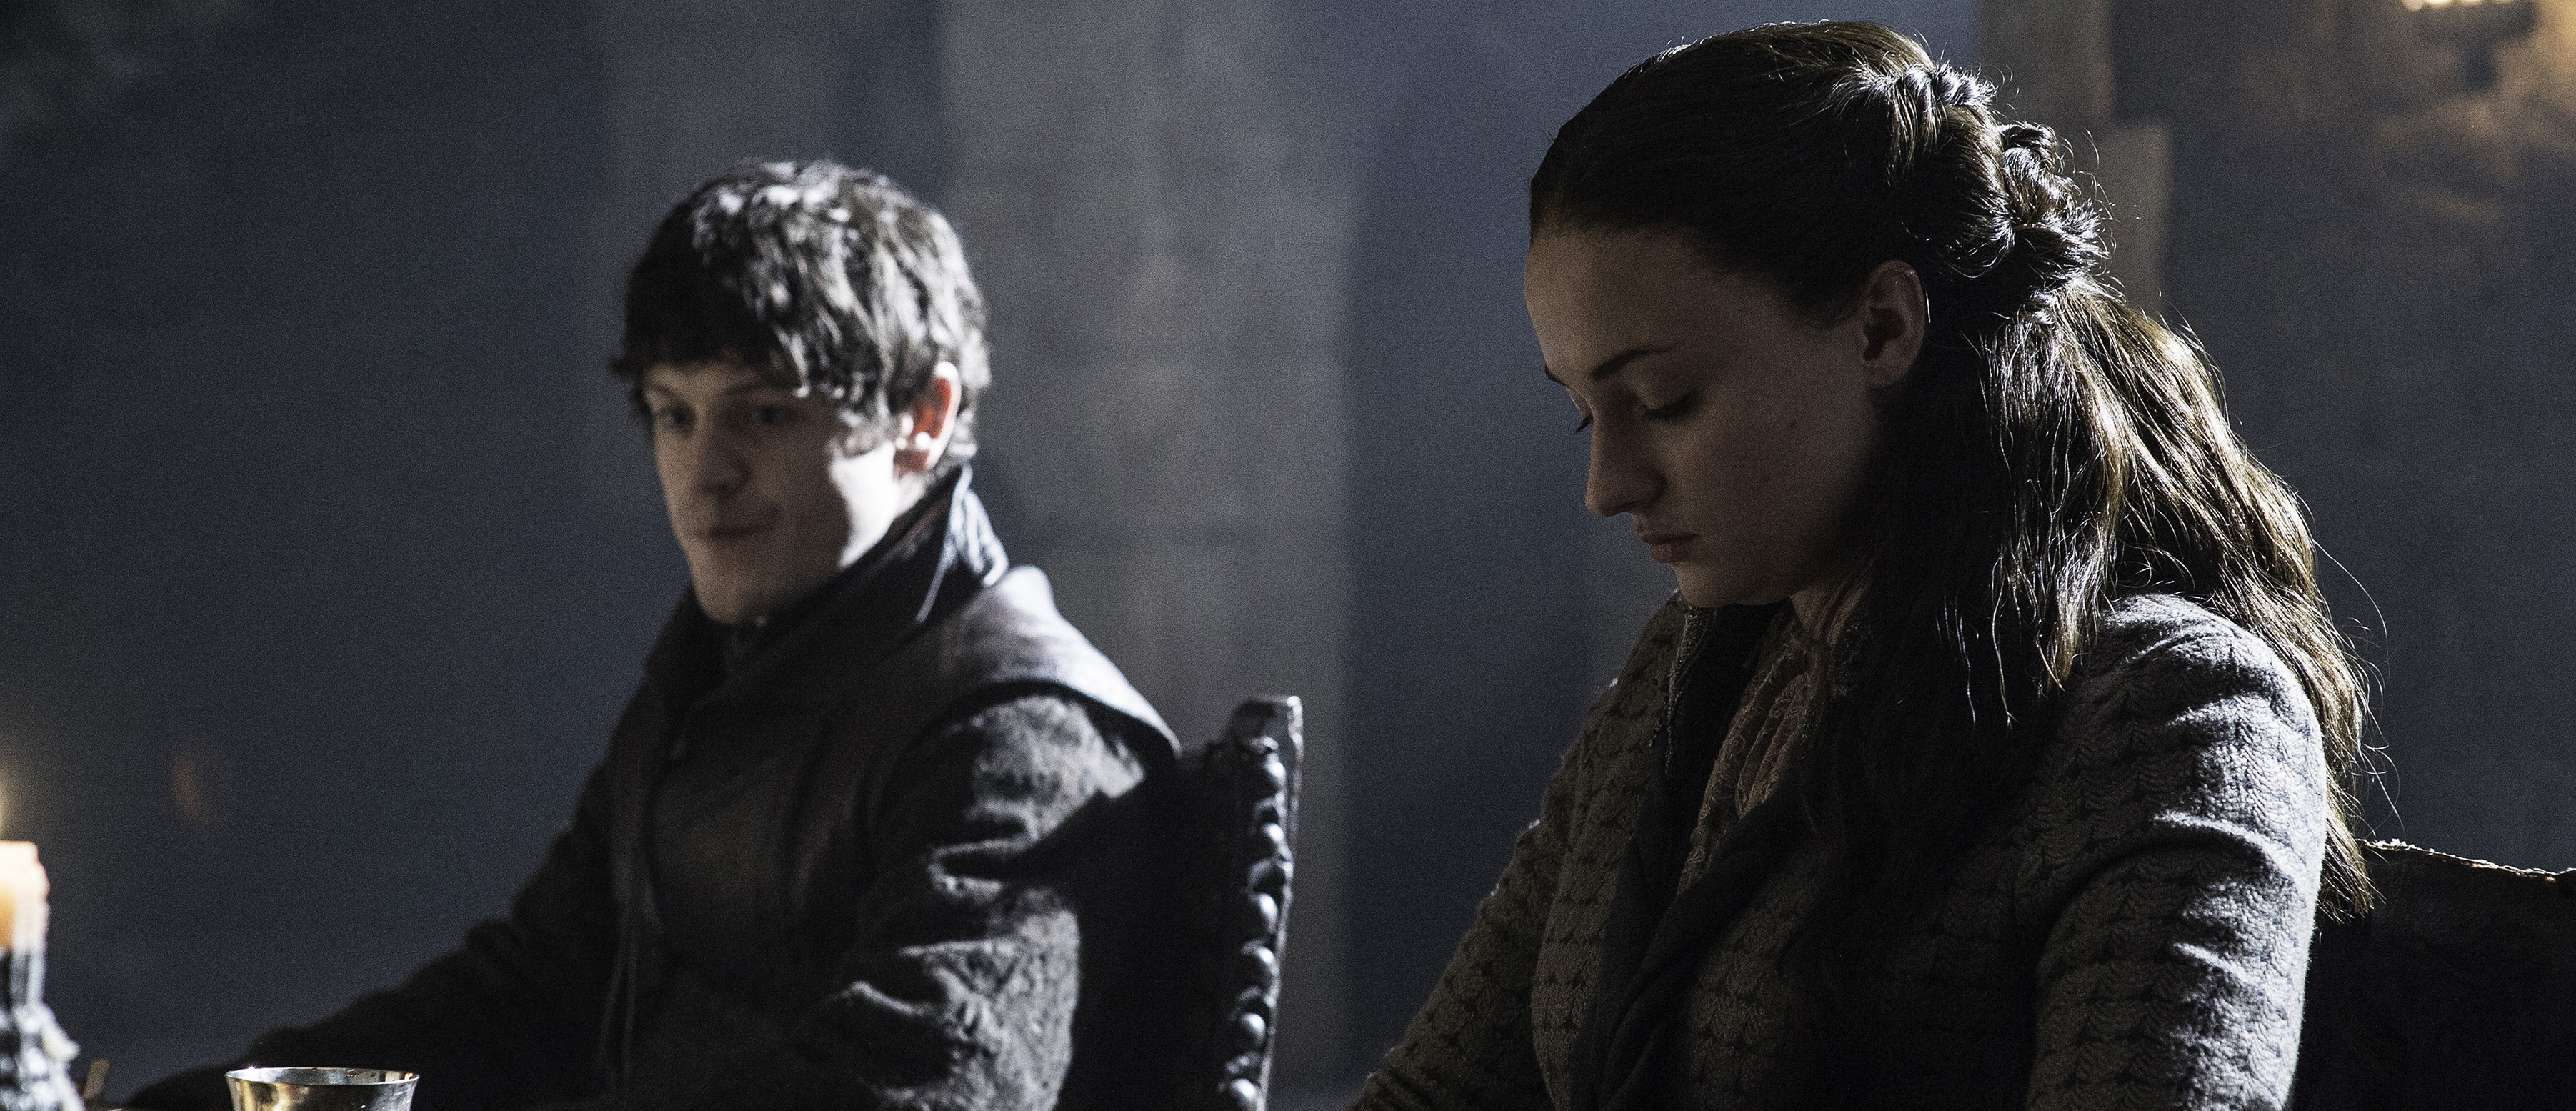 'Game Of Thrones' Might Change Its Approach To Rape In Season 6